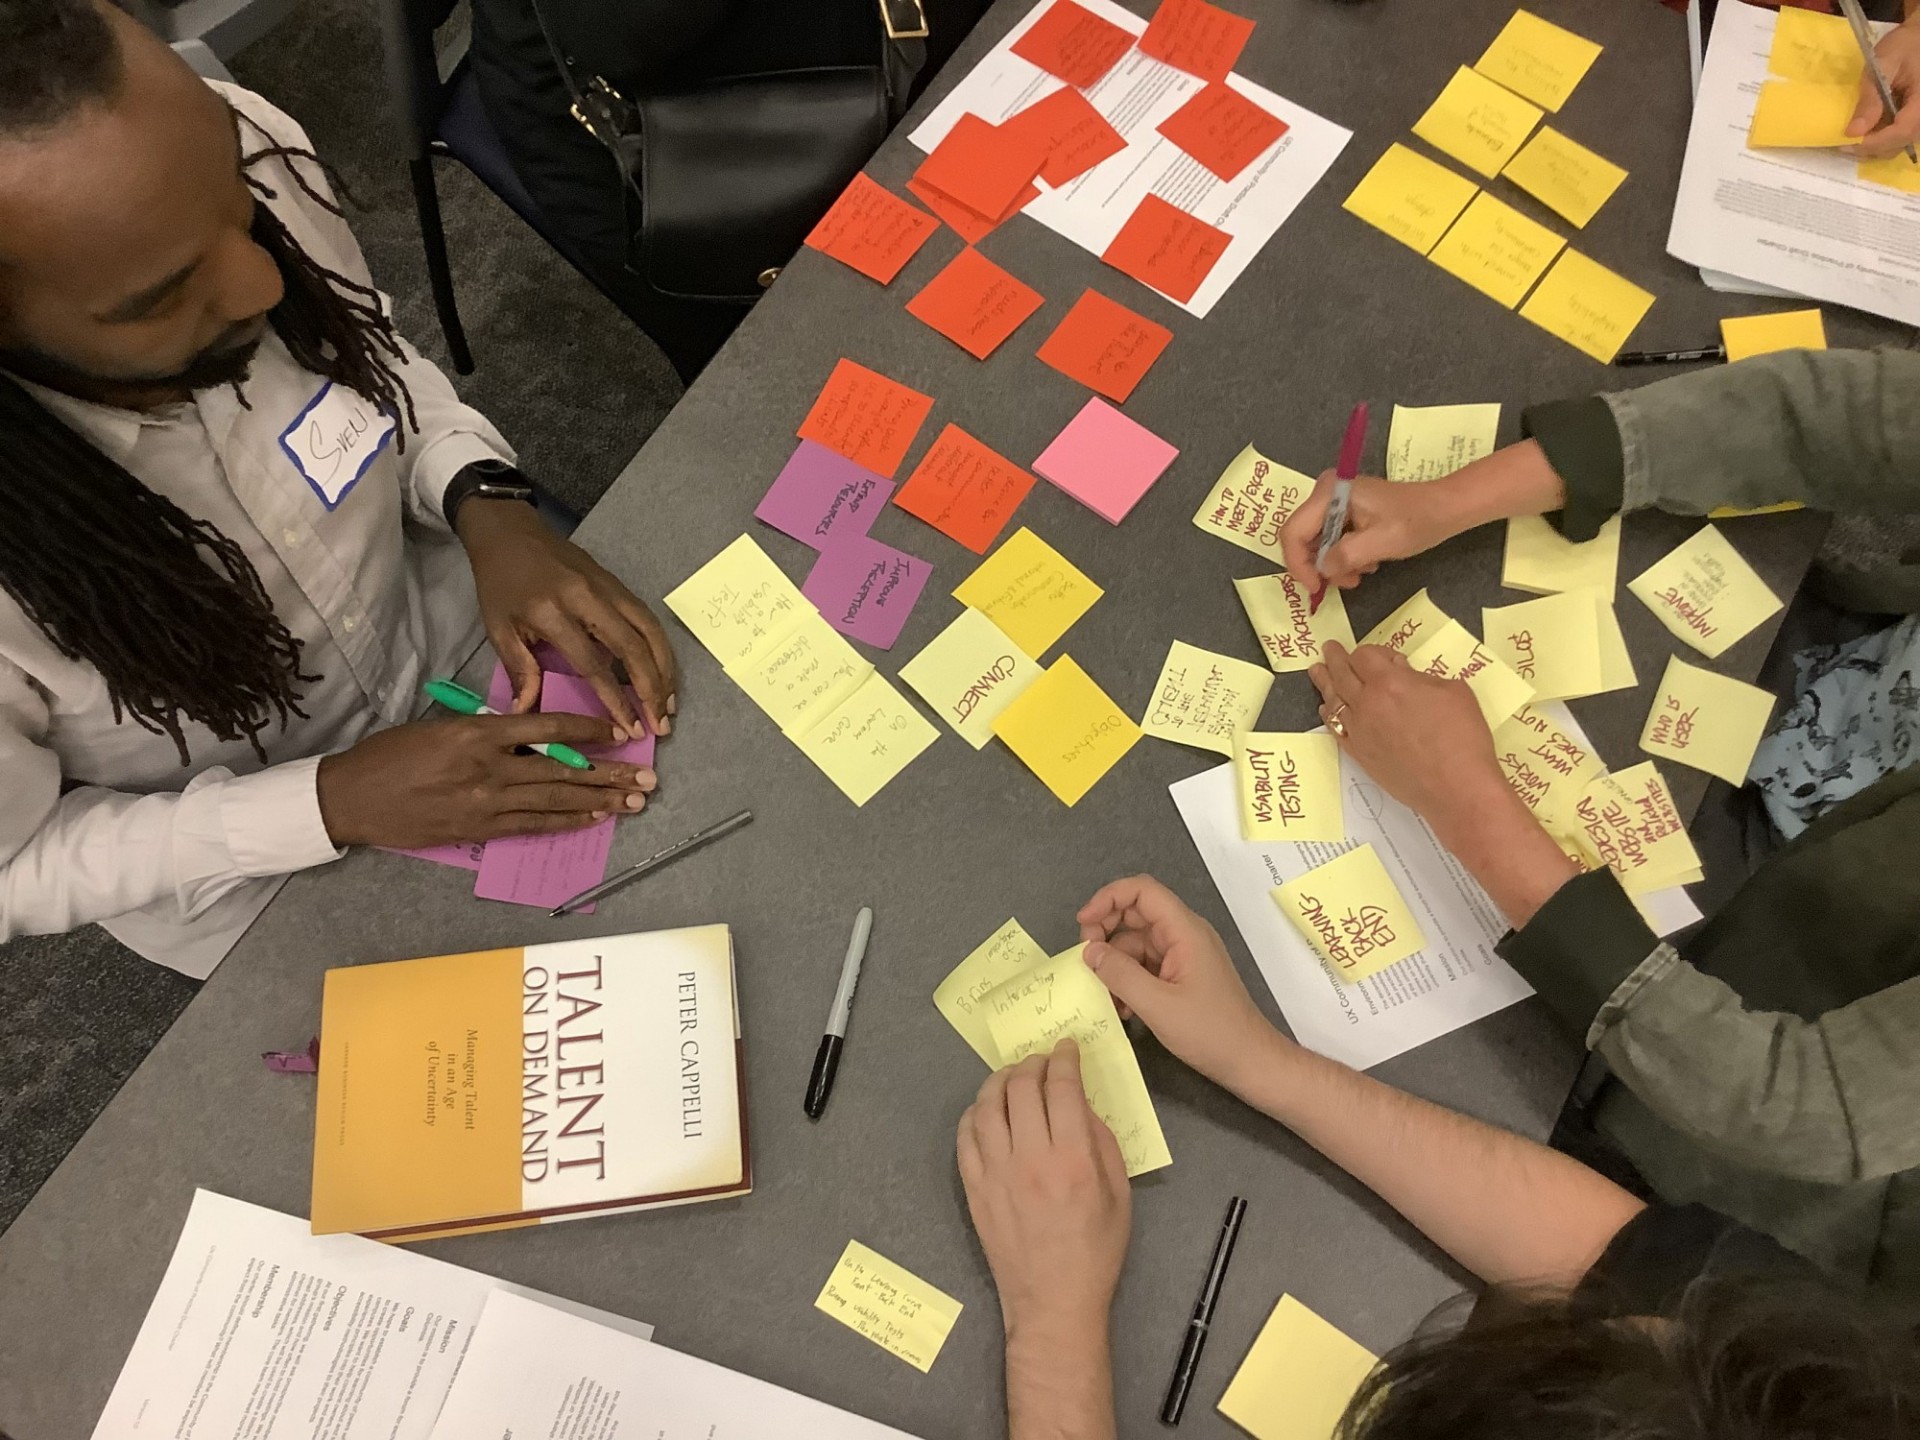 Three people sitting around a table with sticky notes and a book "Talent on Demand"